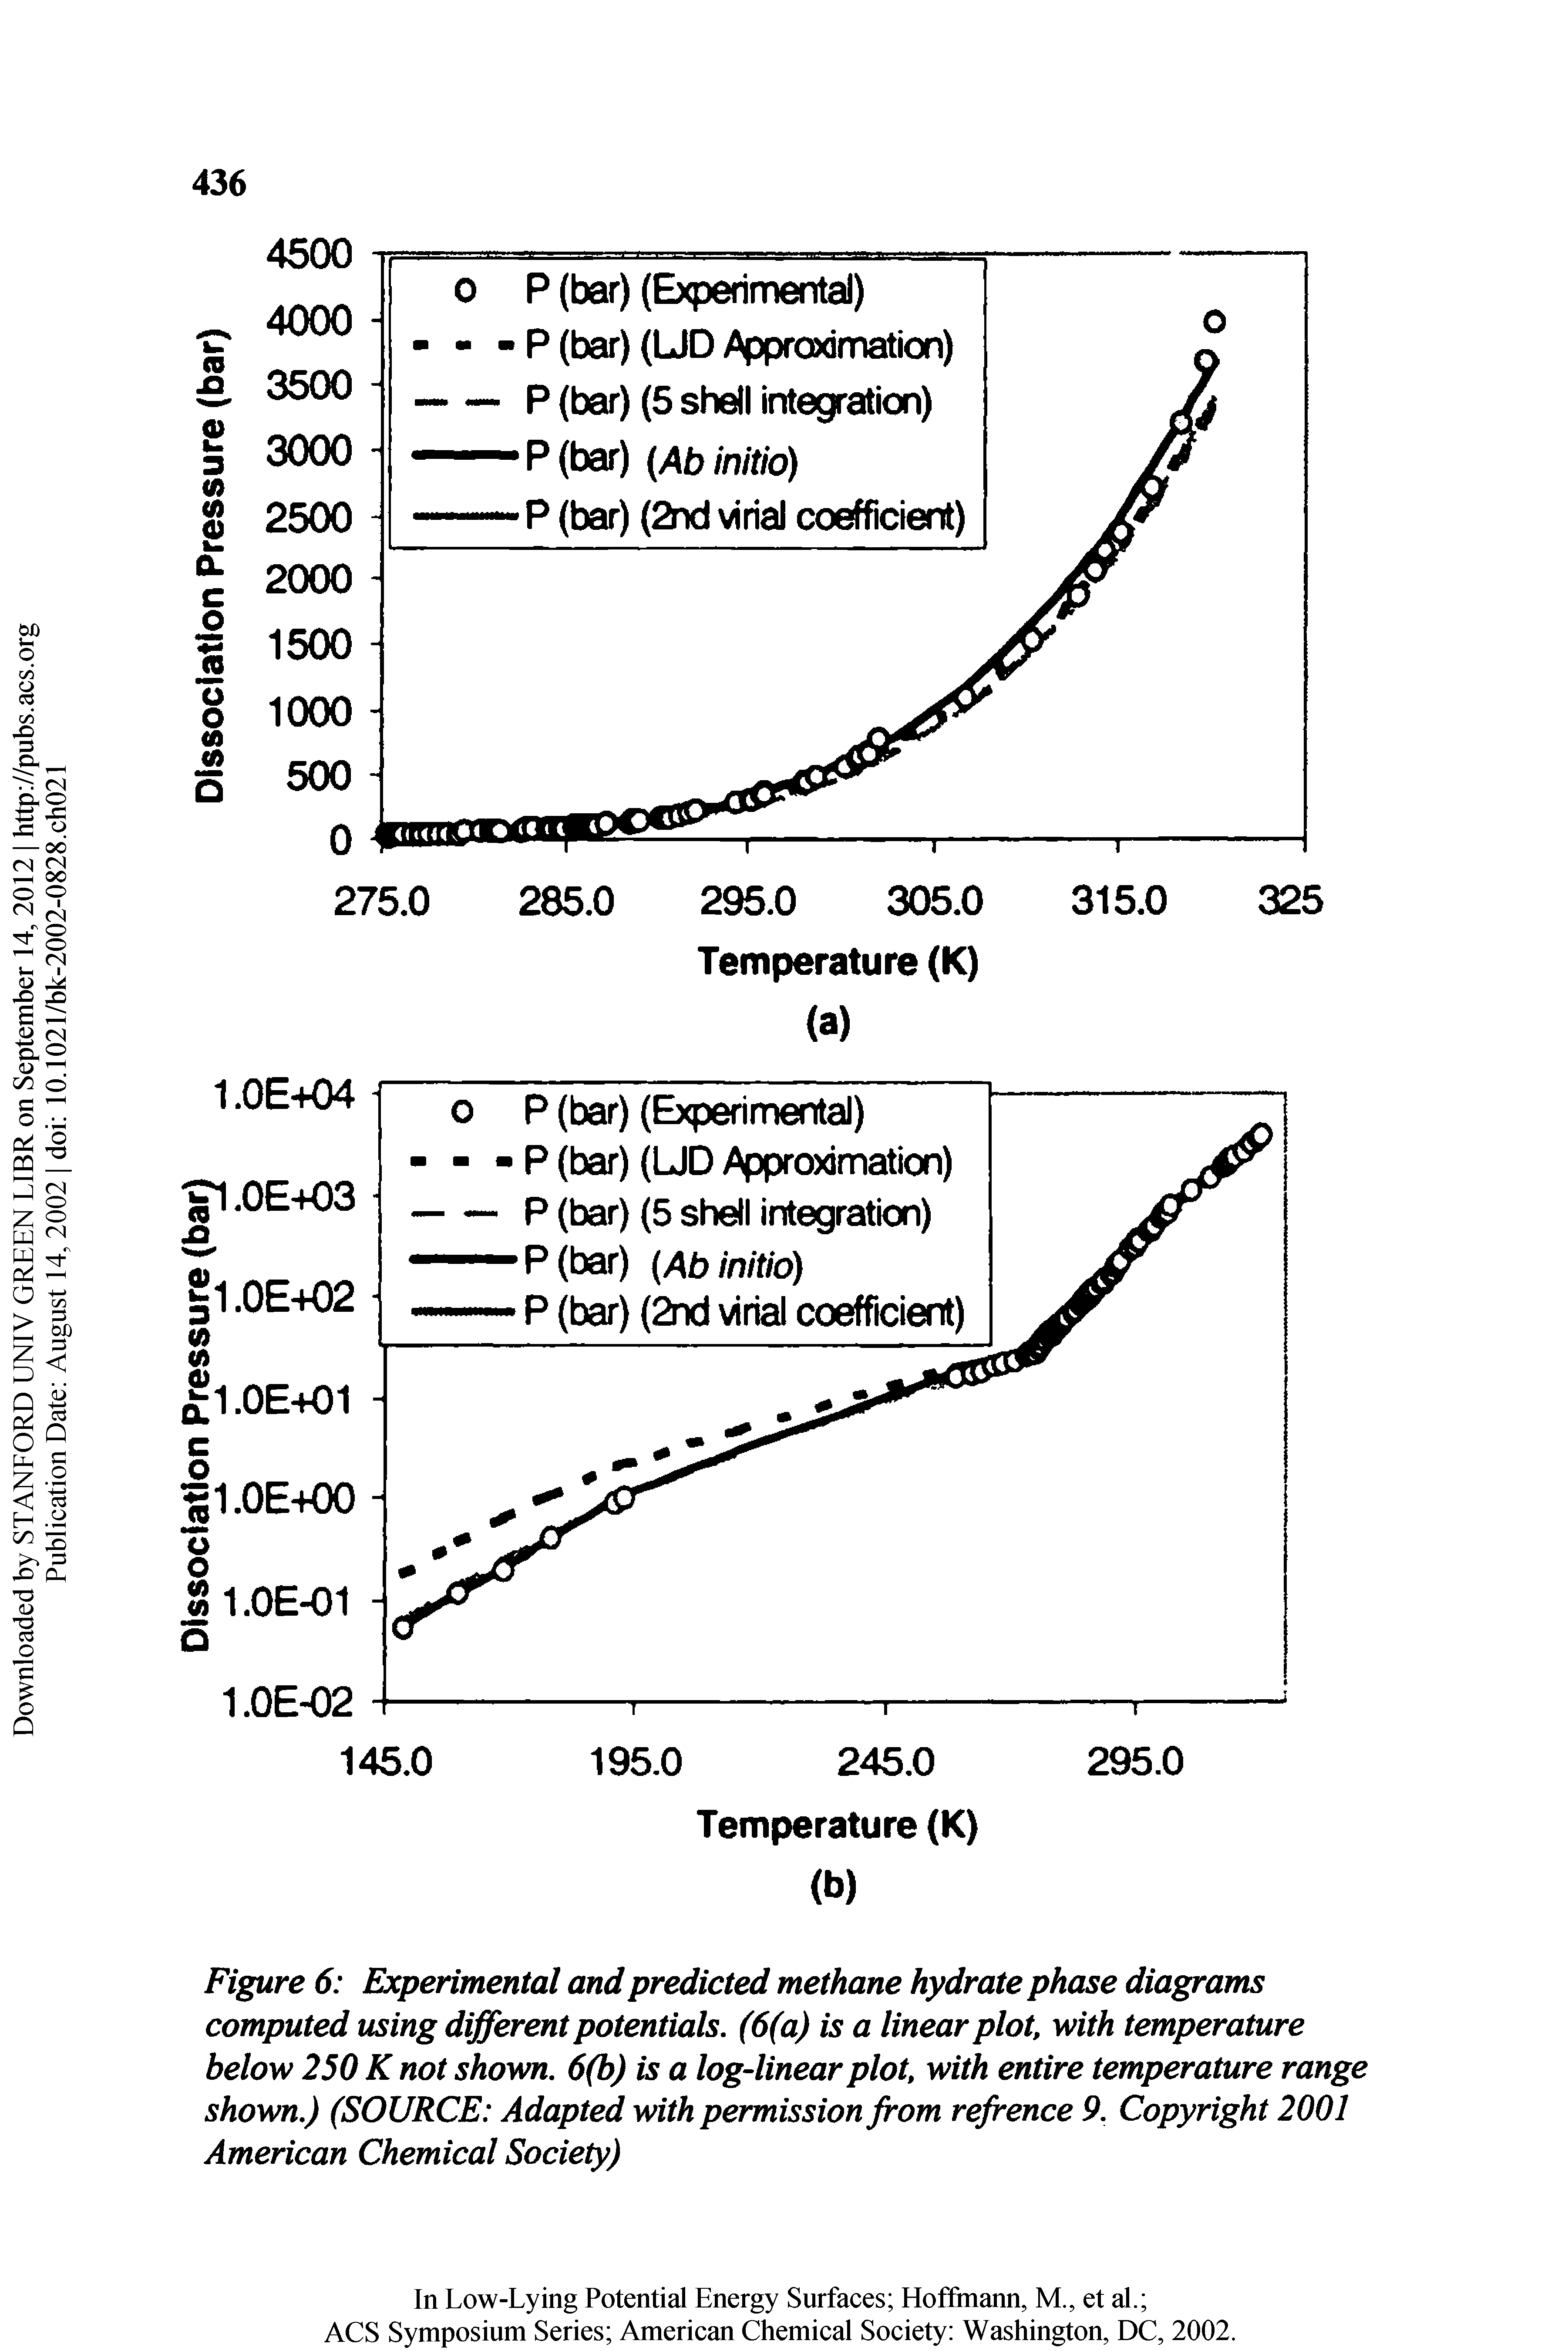 Figure 6 Experimental and predicted methane hydrate phase diagrams computed using different potentials. (6(a) is a linear plot, with temperature below 250 K not shown. 6(b) is a log-linear plot, with entire temperature range shown.) (SOURCE Adapted with permission from refrence 9. Copyright 2001 American Chemical Society)...